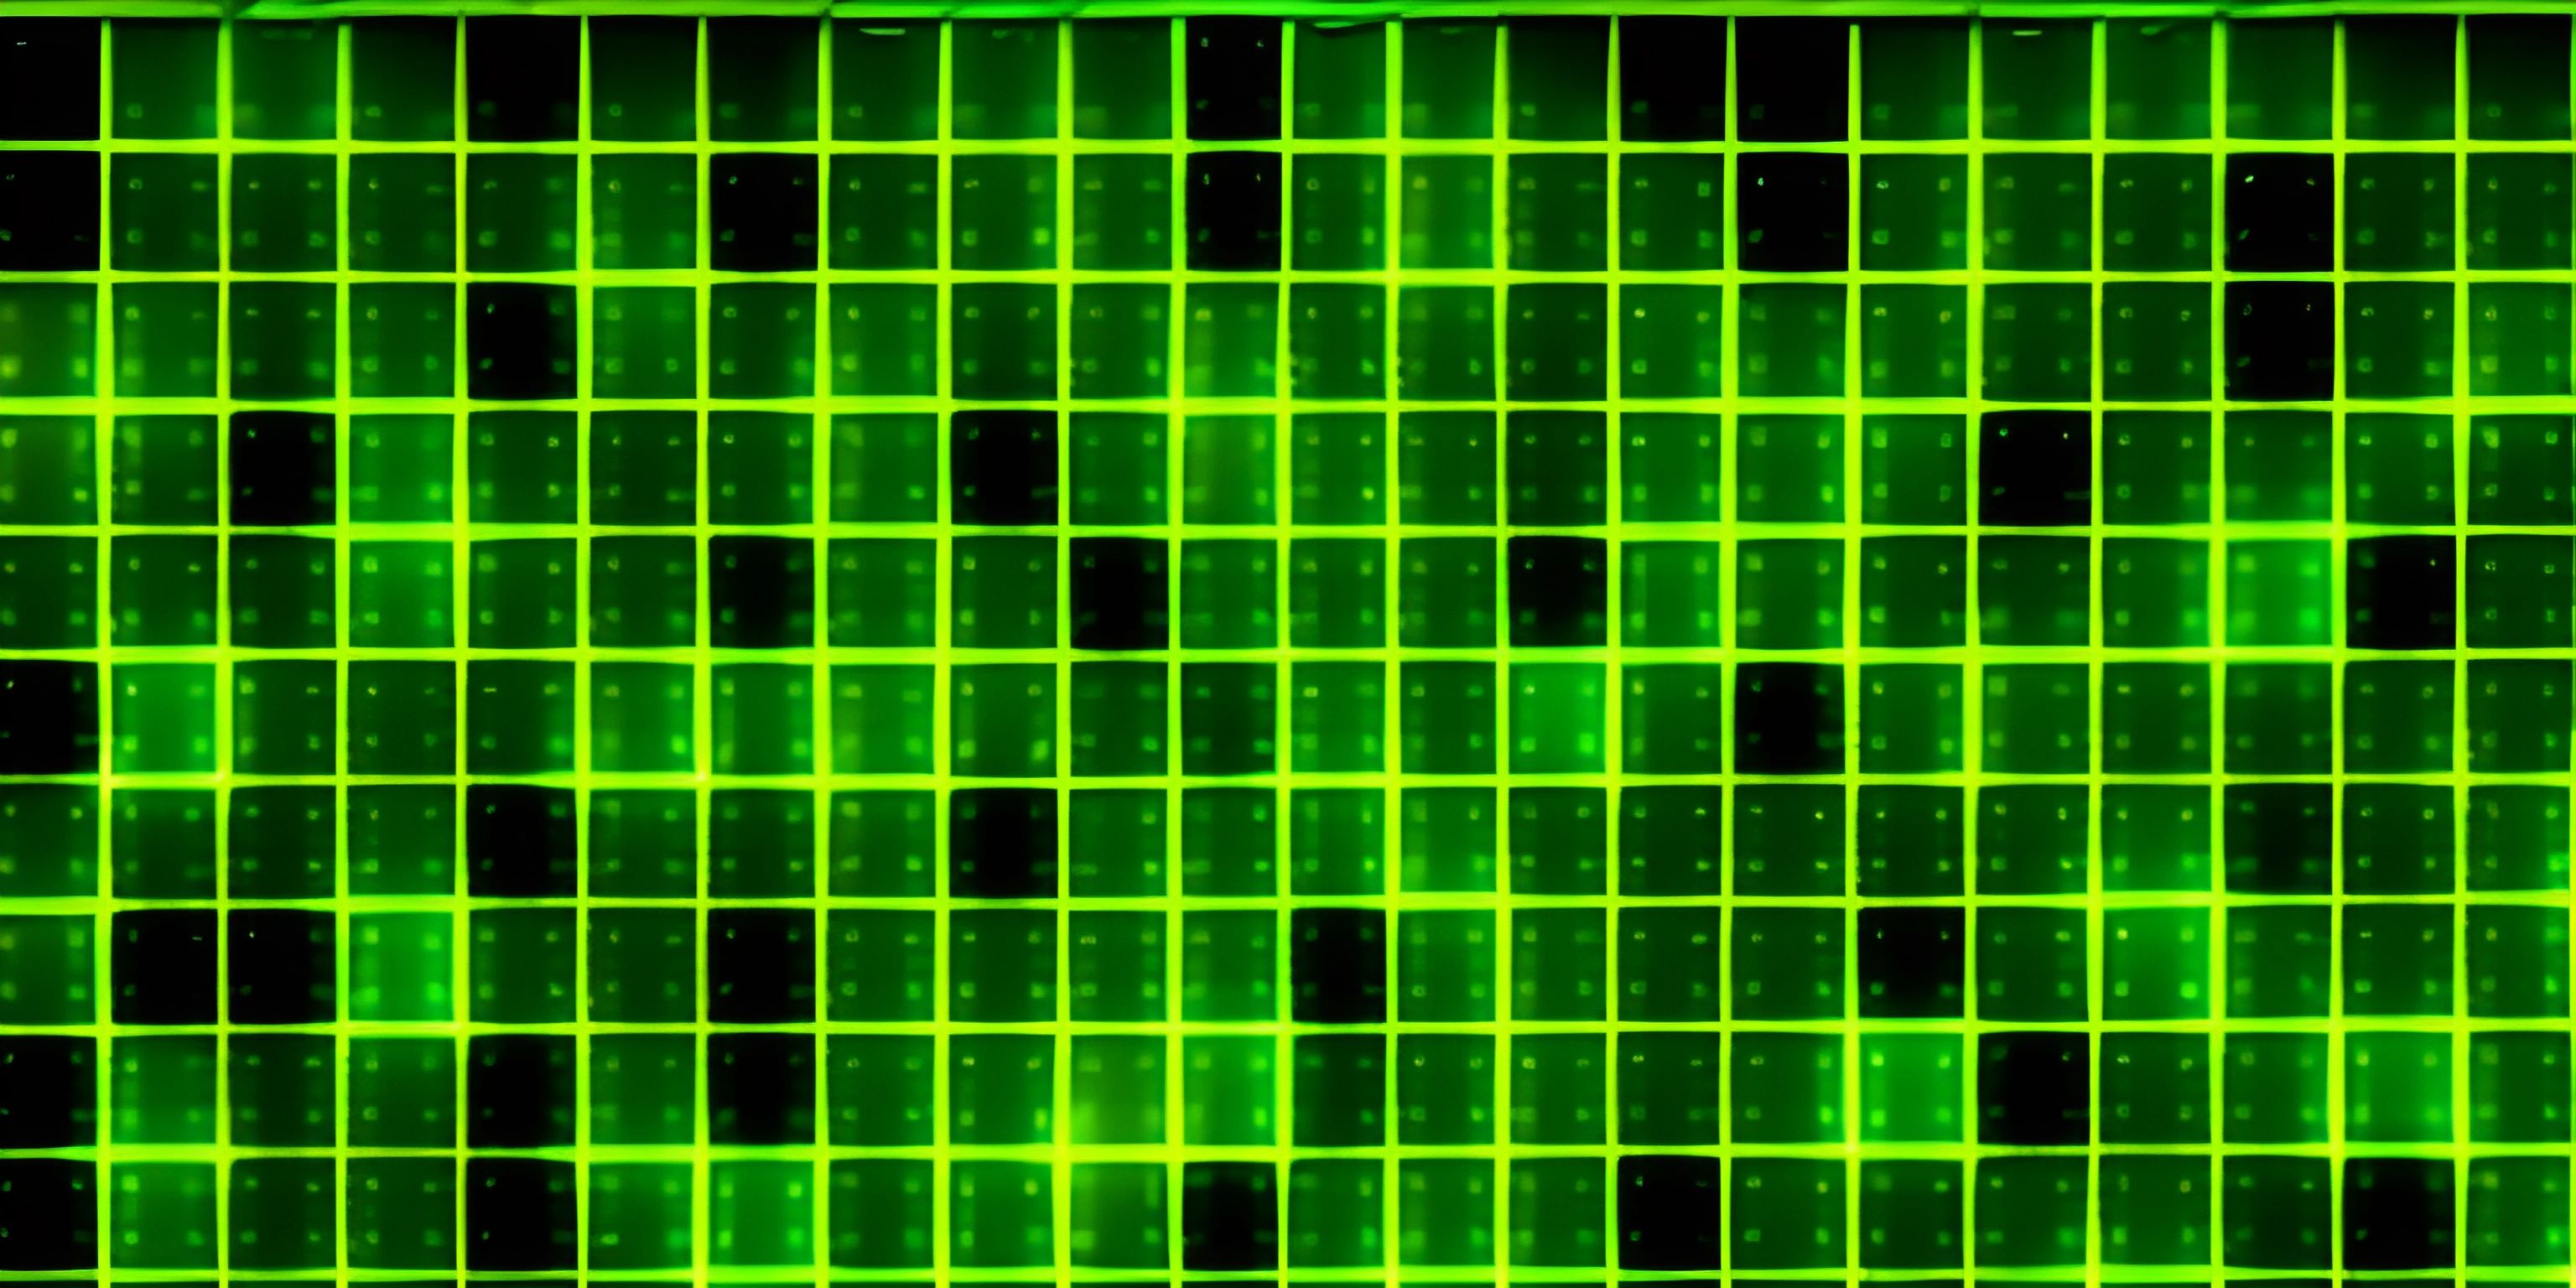 green computer network grid meshes pattern in seamlessly motion - pixelated image stock photo